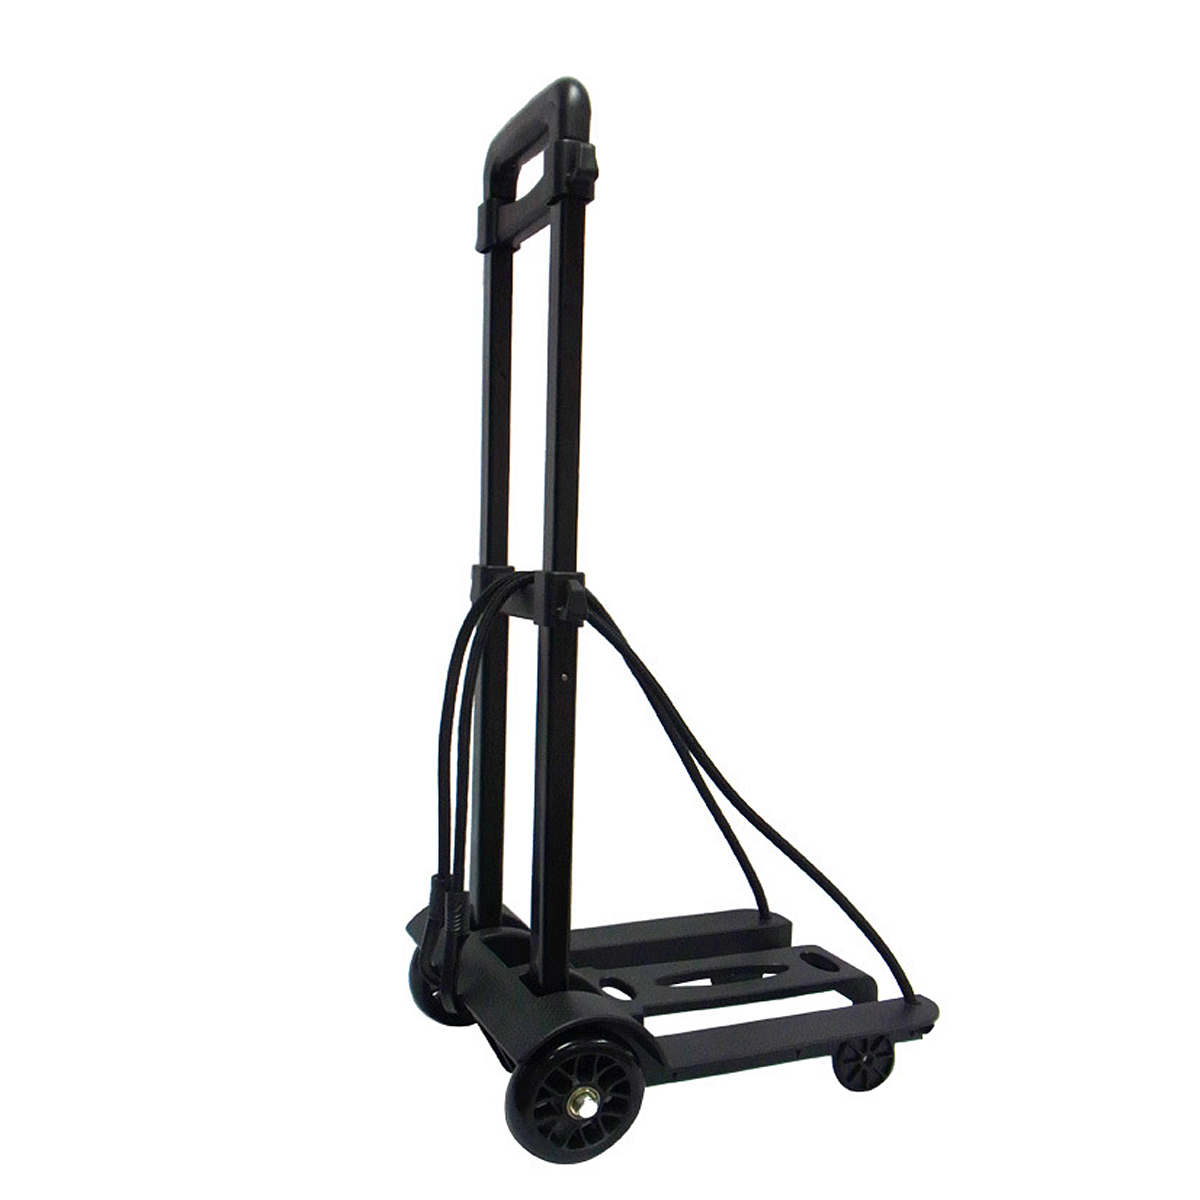 

Portable Folding Cart Grocery Shopping Luggage Transportation Small Tool Cart